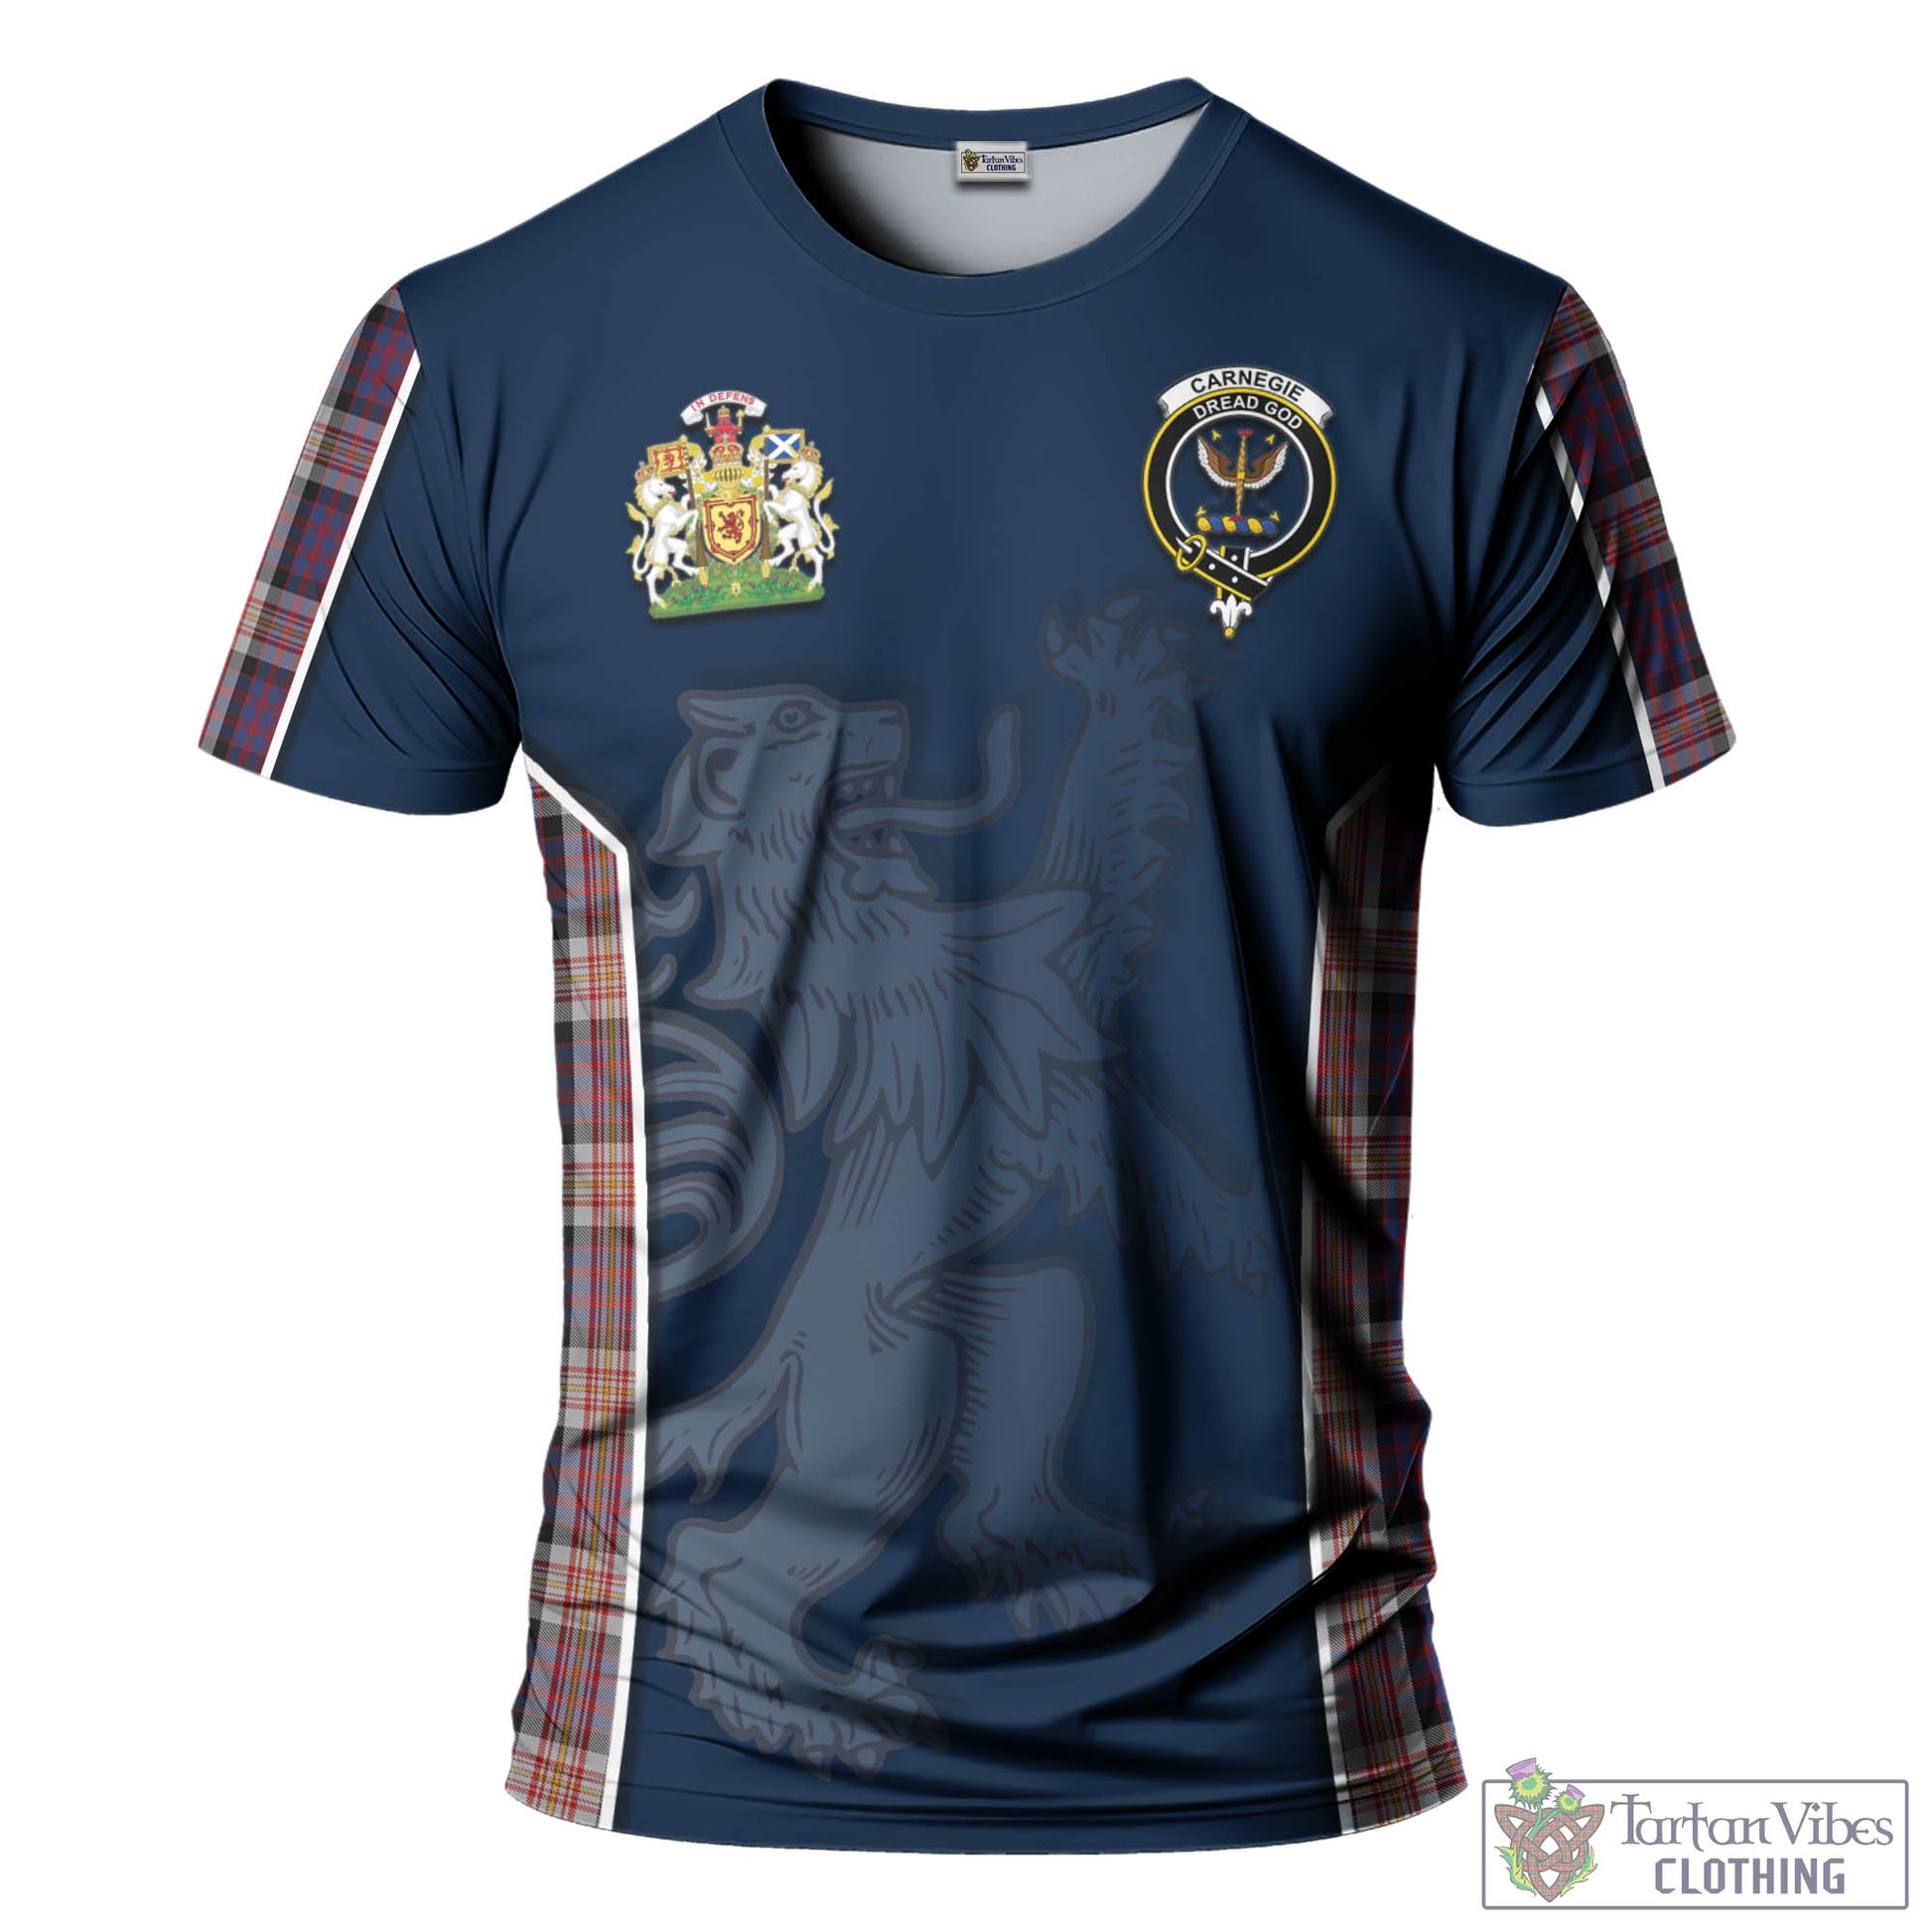 Tartan Vibes Clothing Carnegie Tartan T-Shirt with Family Crest and Lion Rampant Vibes Sport Style